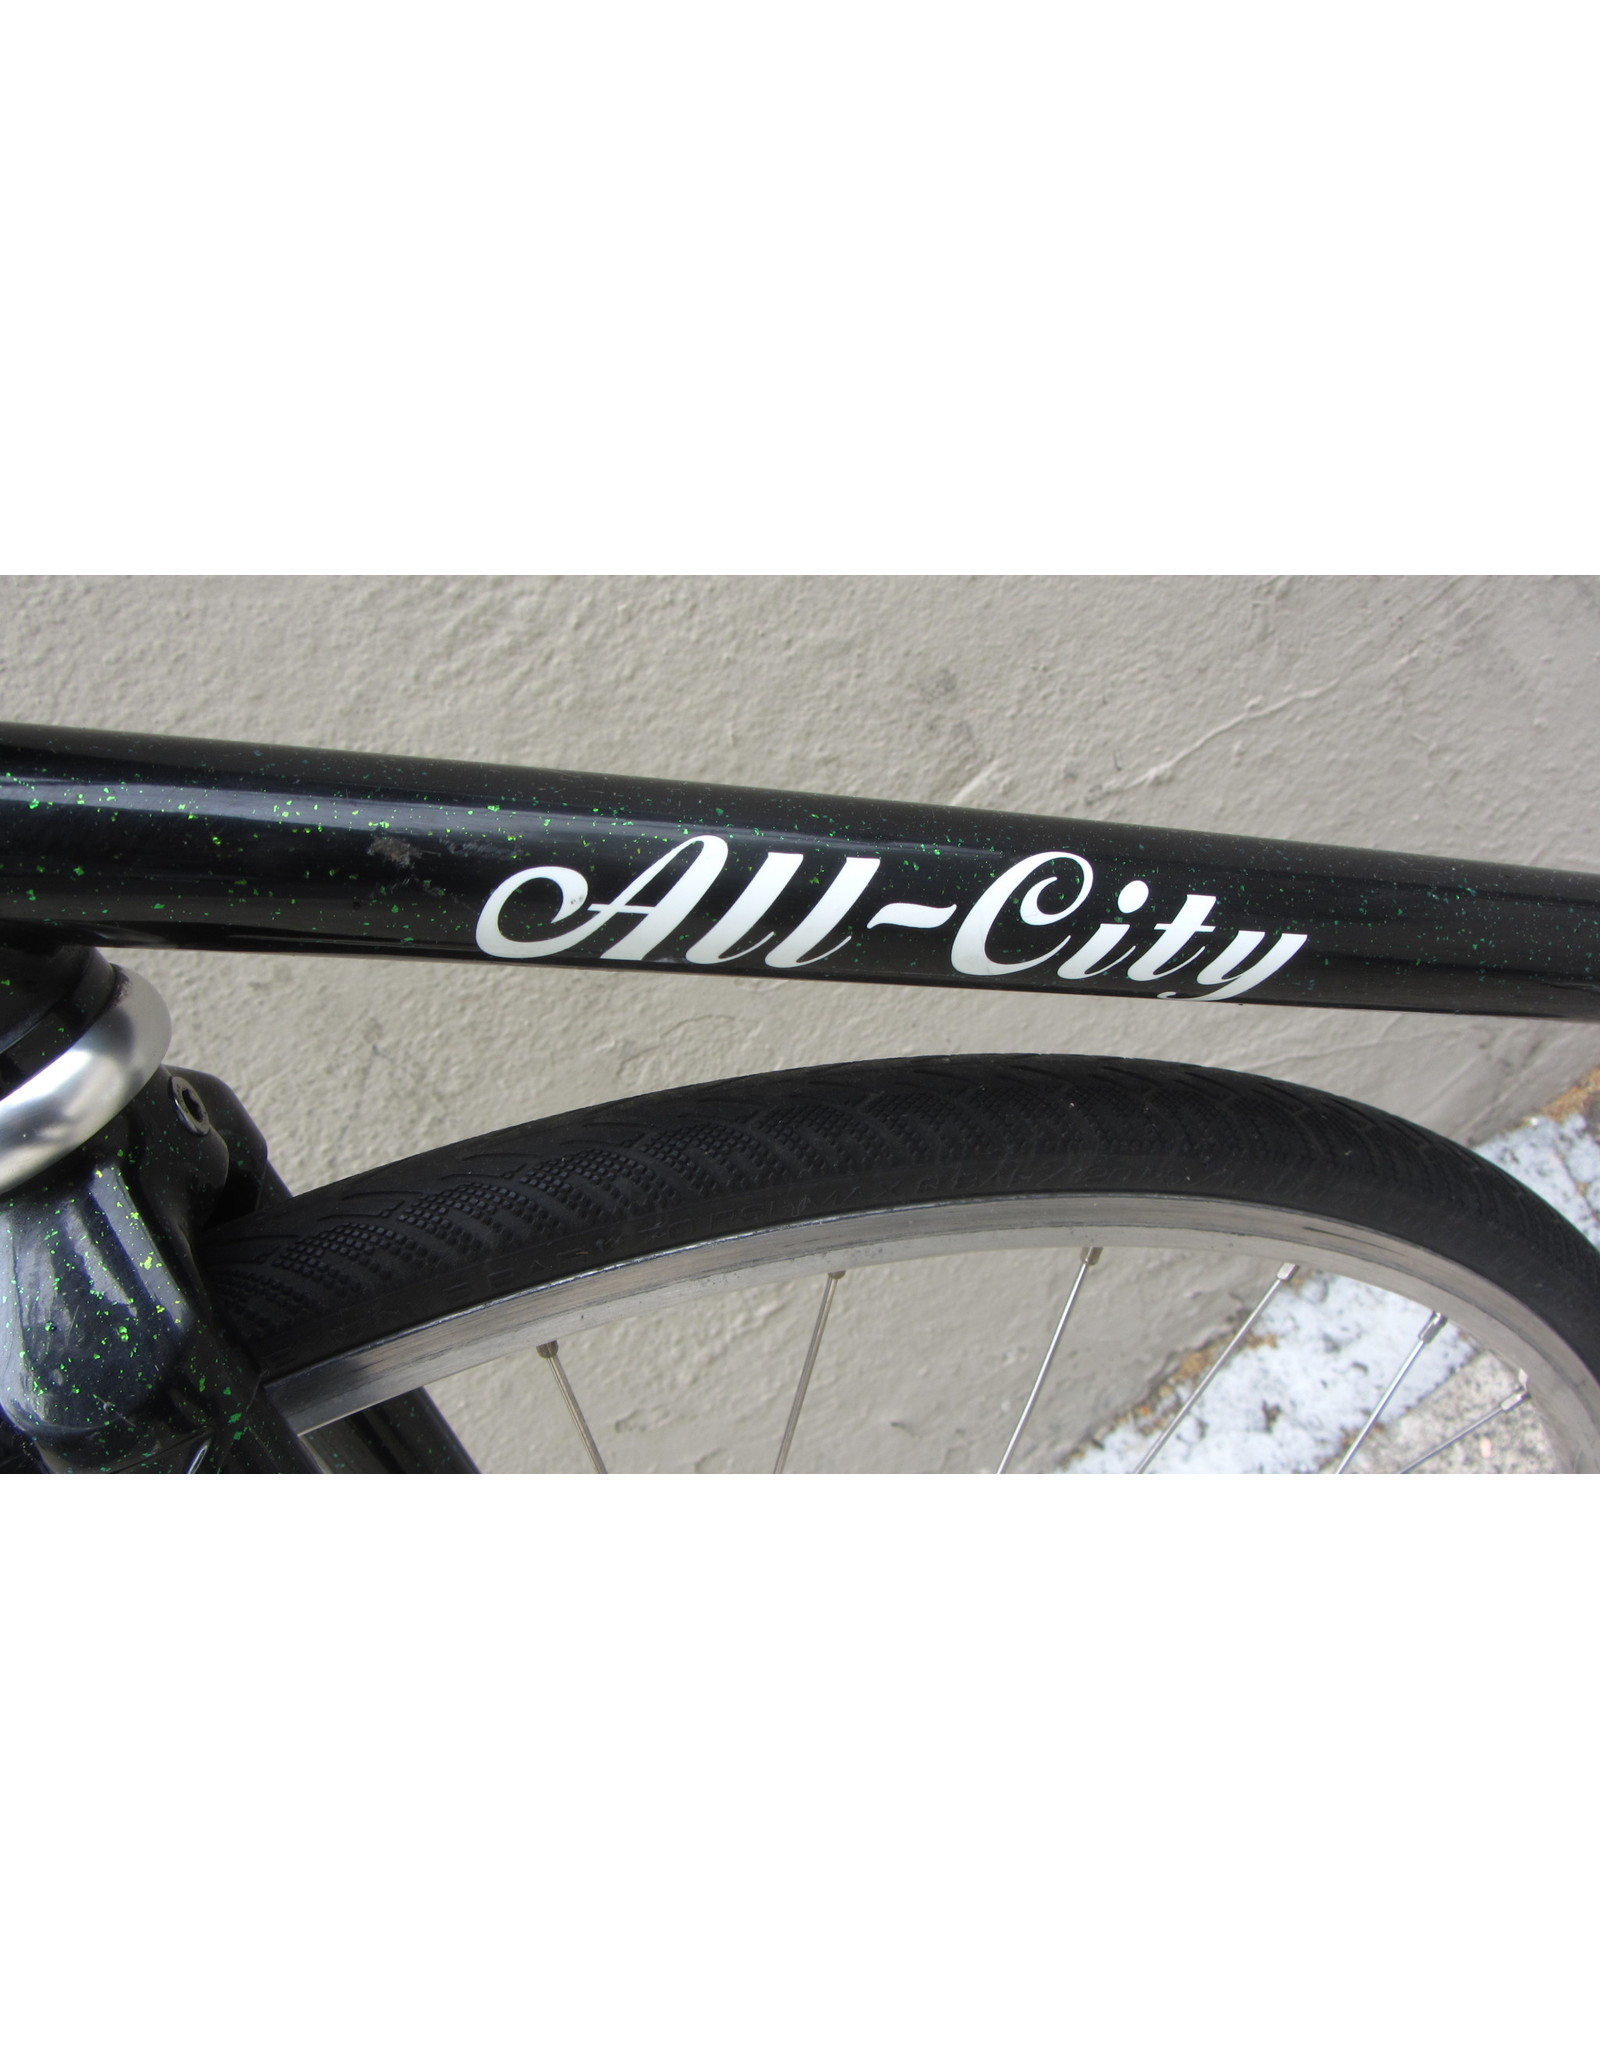 All-City All-City Big Block Single Speed, 18Inches, Black